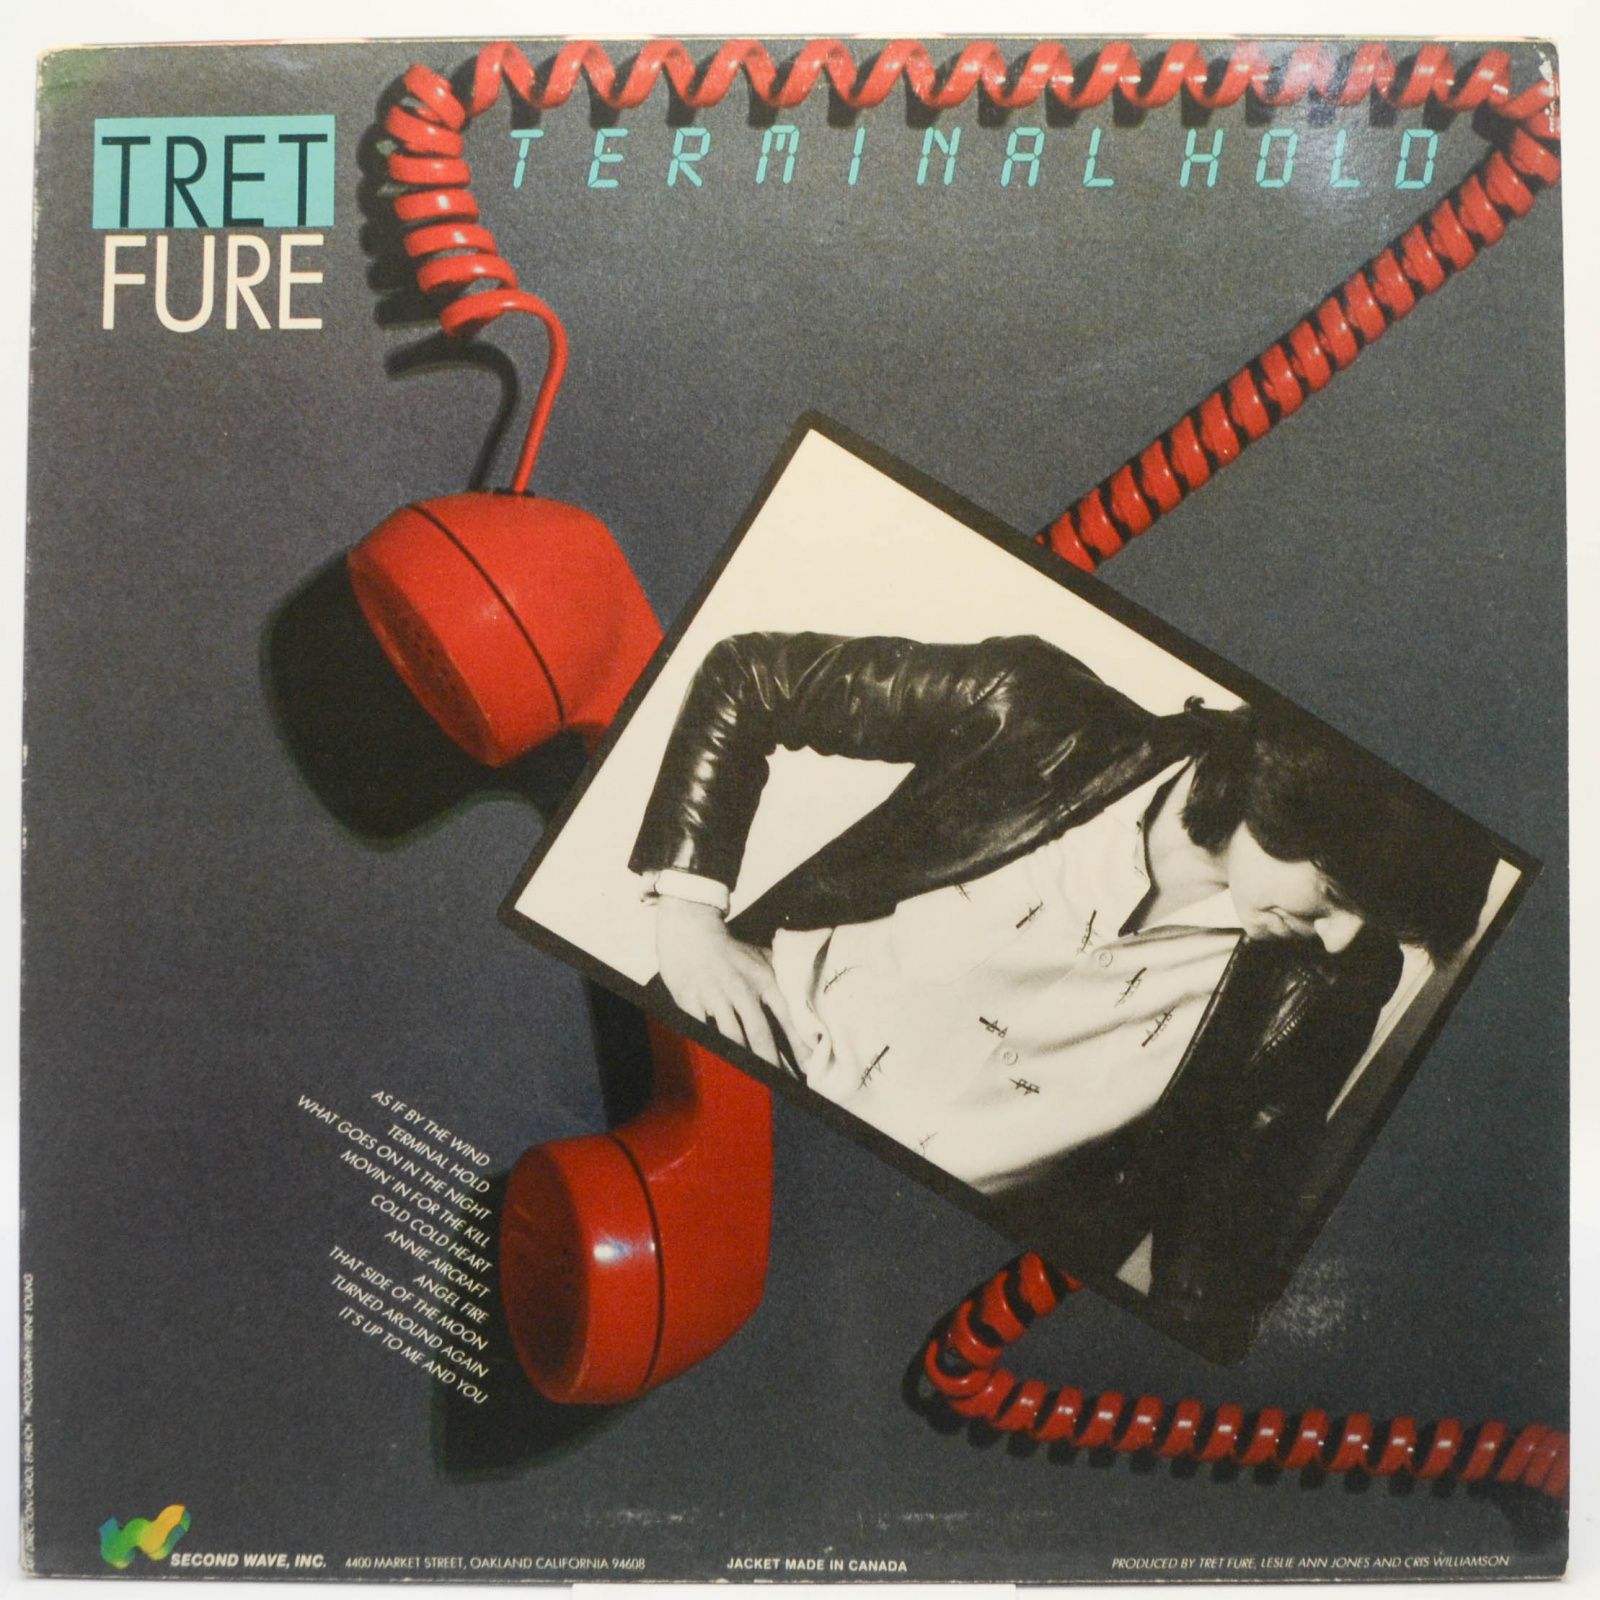 Tret Fure — Terminal Hold, 1984